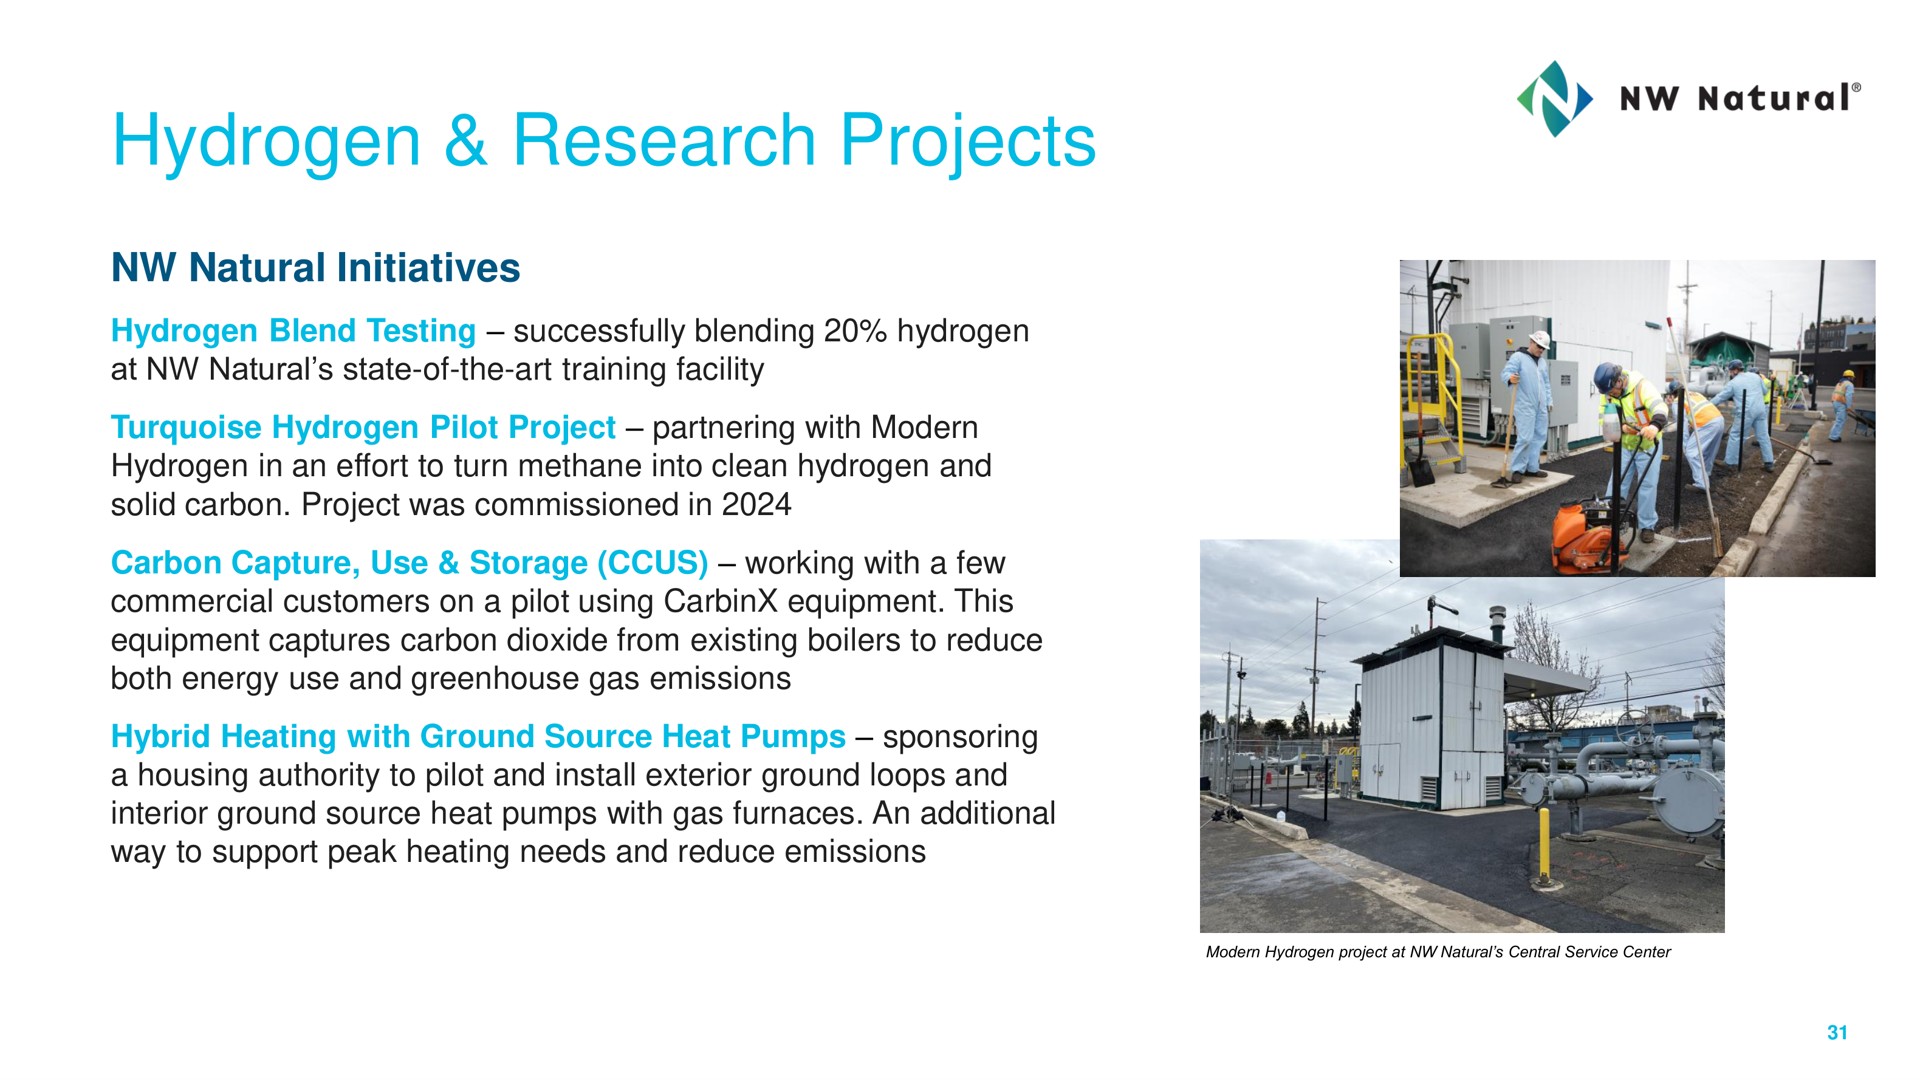 hydrogen research projects | NW Natural Holdings